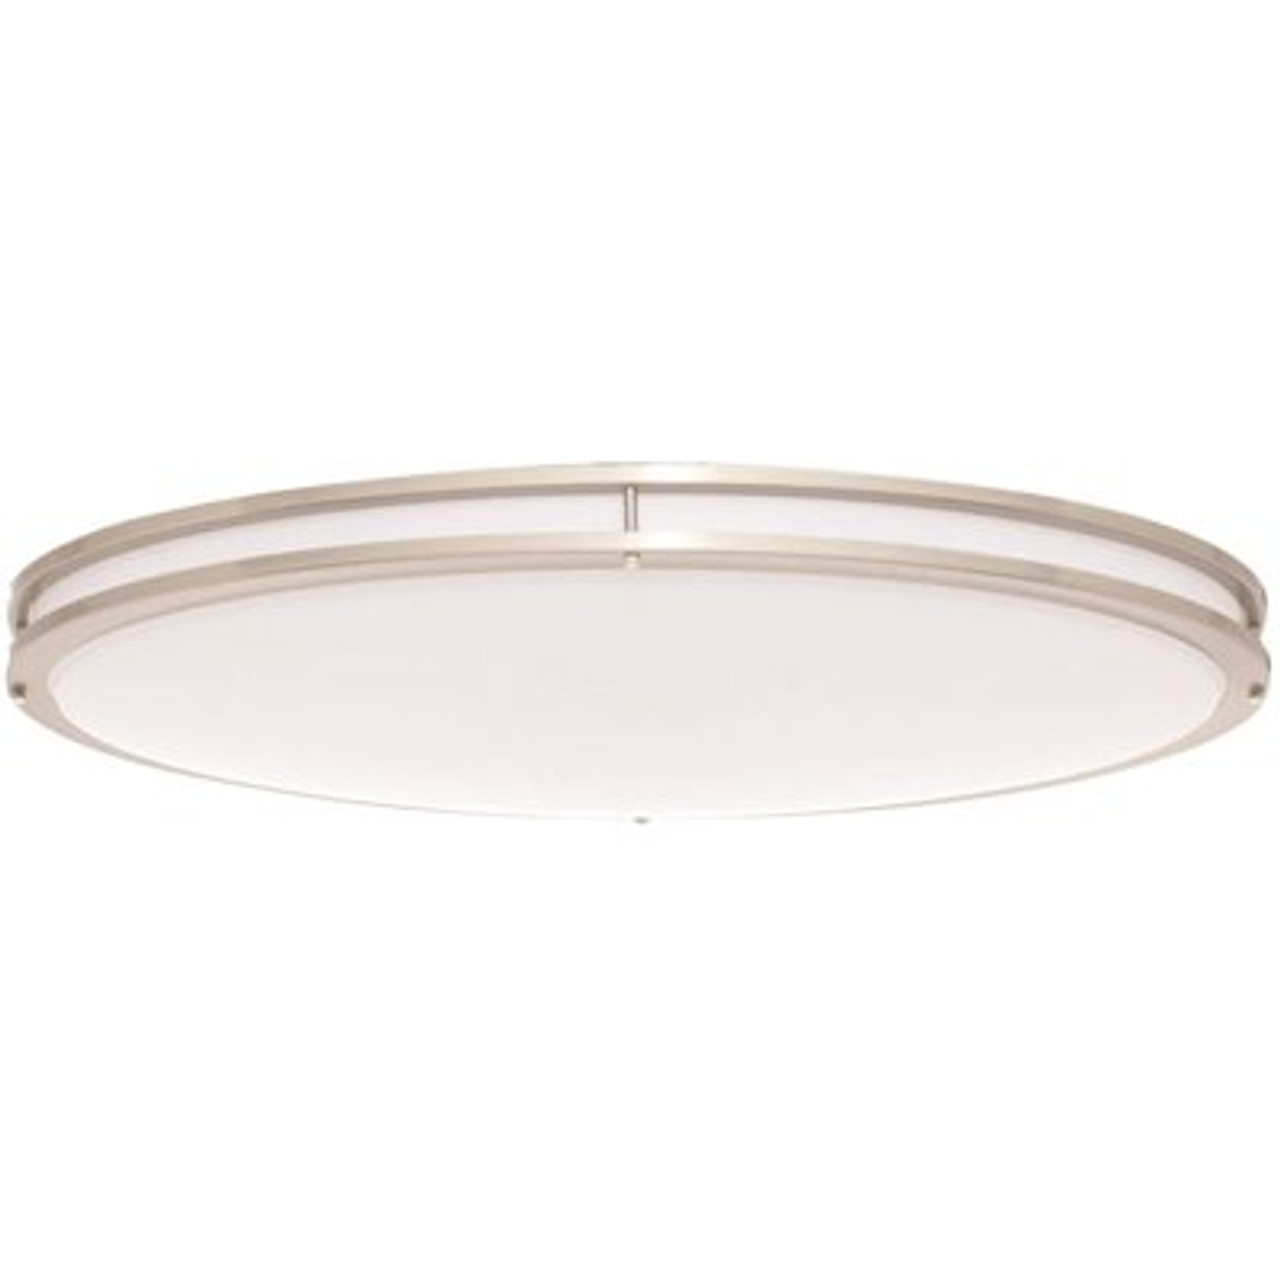 Private Brand Unbranded 32 In. Oval Brushed Nickel Integrated Led Ceiling Flush Mount